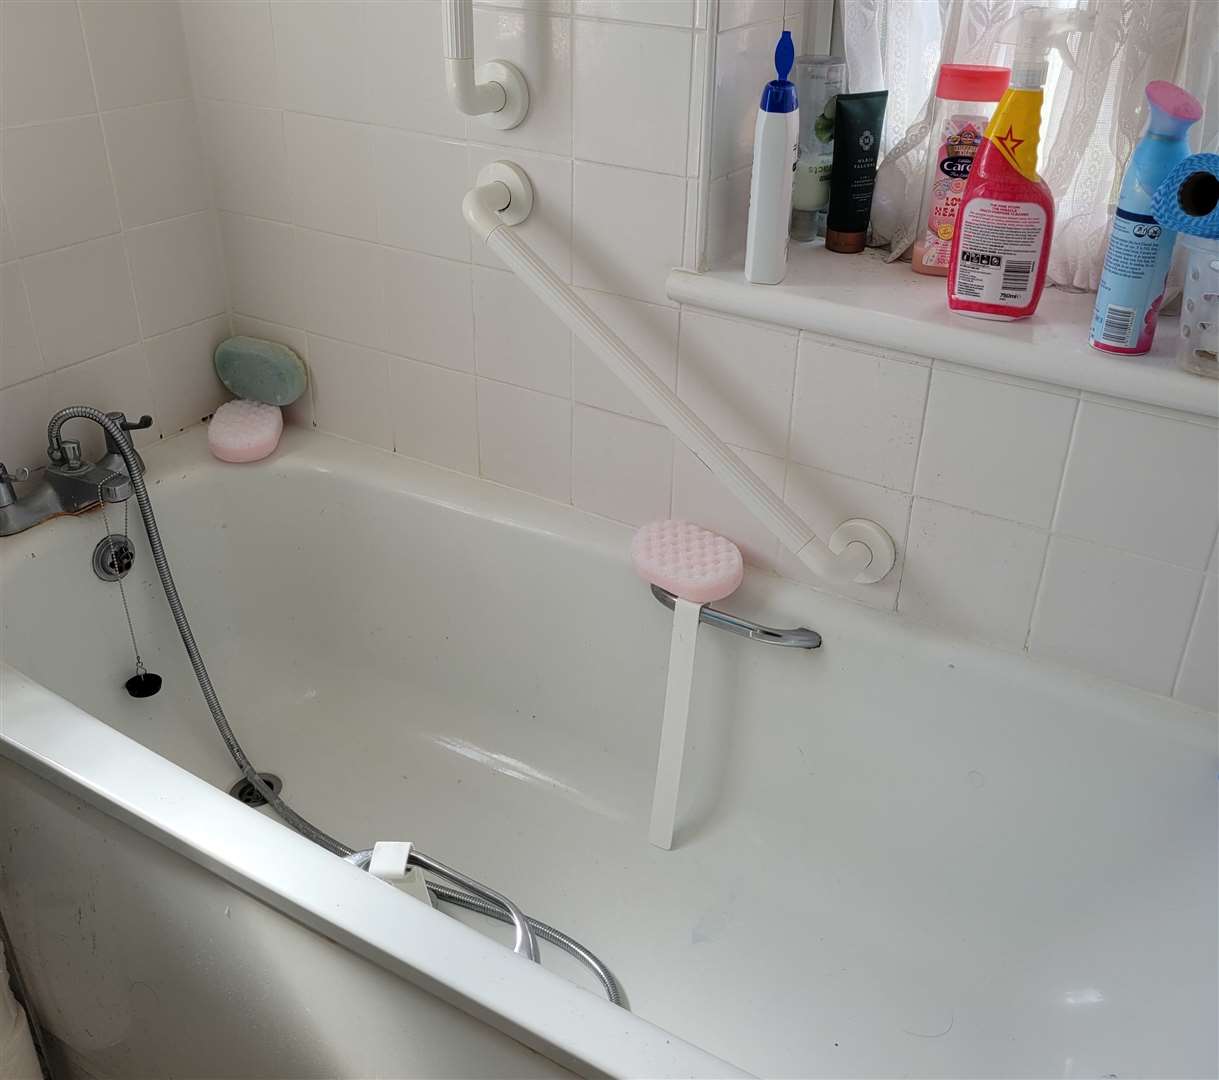 Miss Holmes' bath in her house, which she desperately needs changing to help her disability